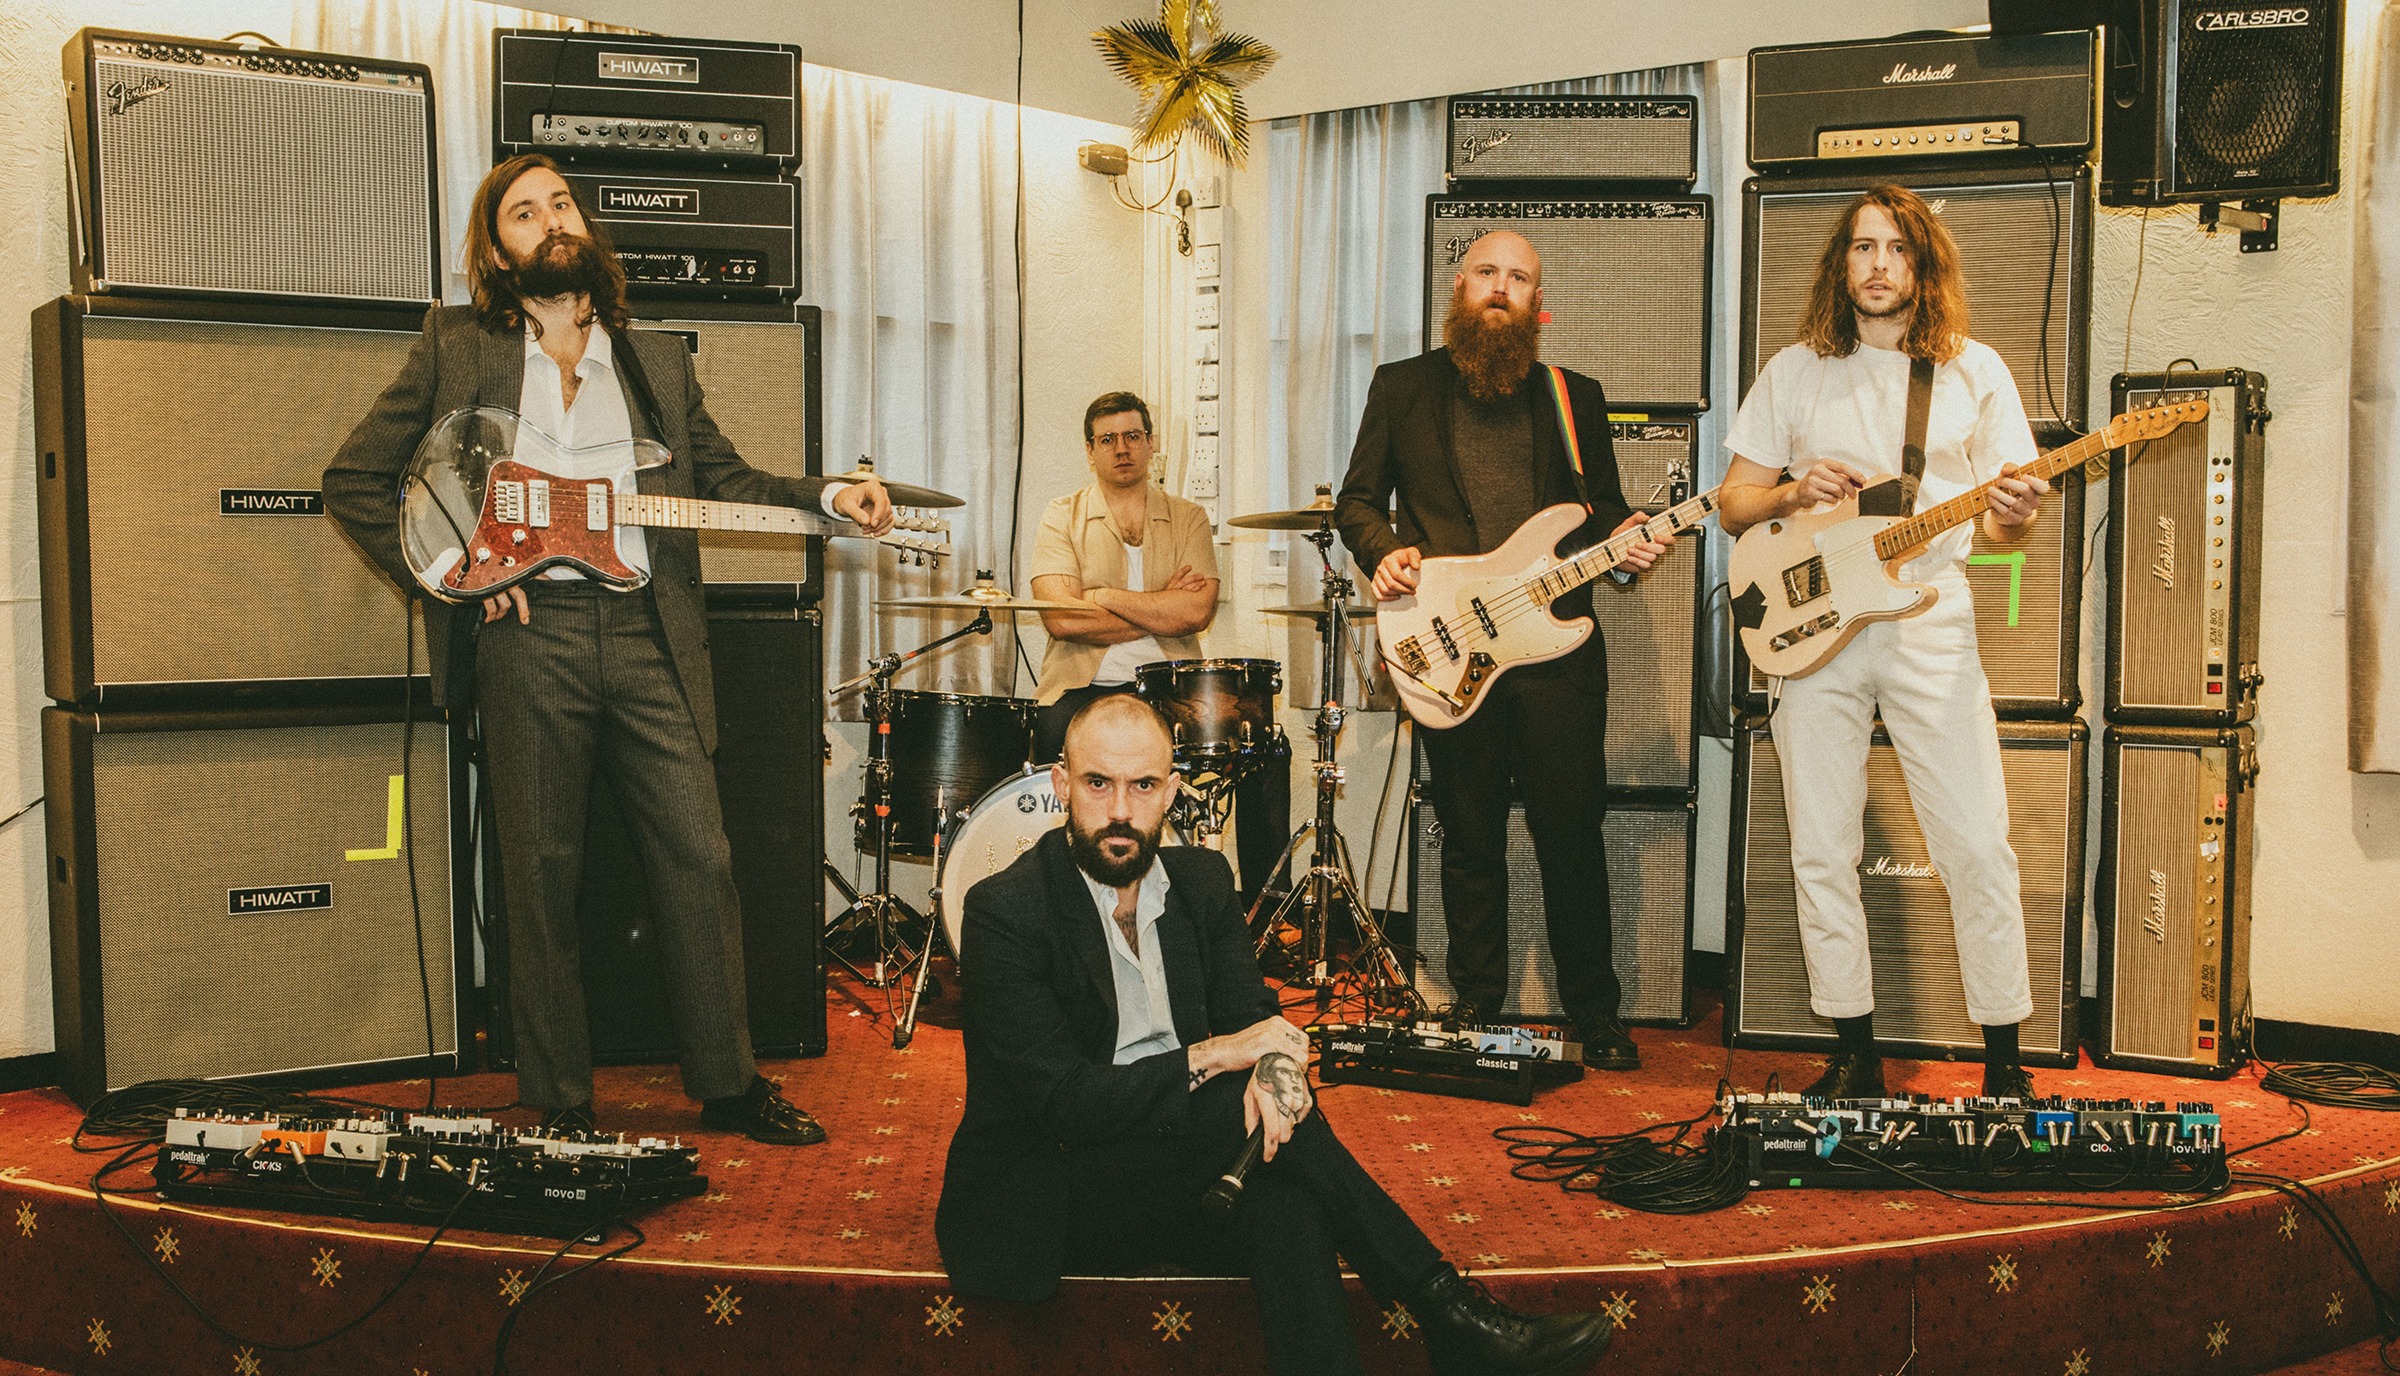 IDLES announce new album 'Ultra Mono' out 25th September - Hear 'Grounds' Now 1